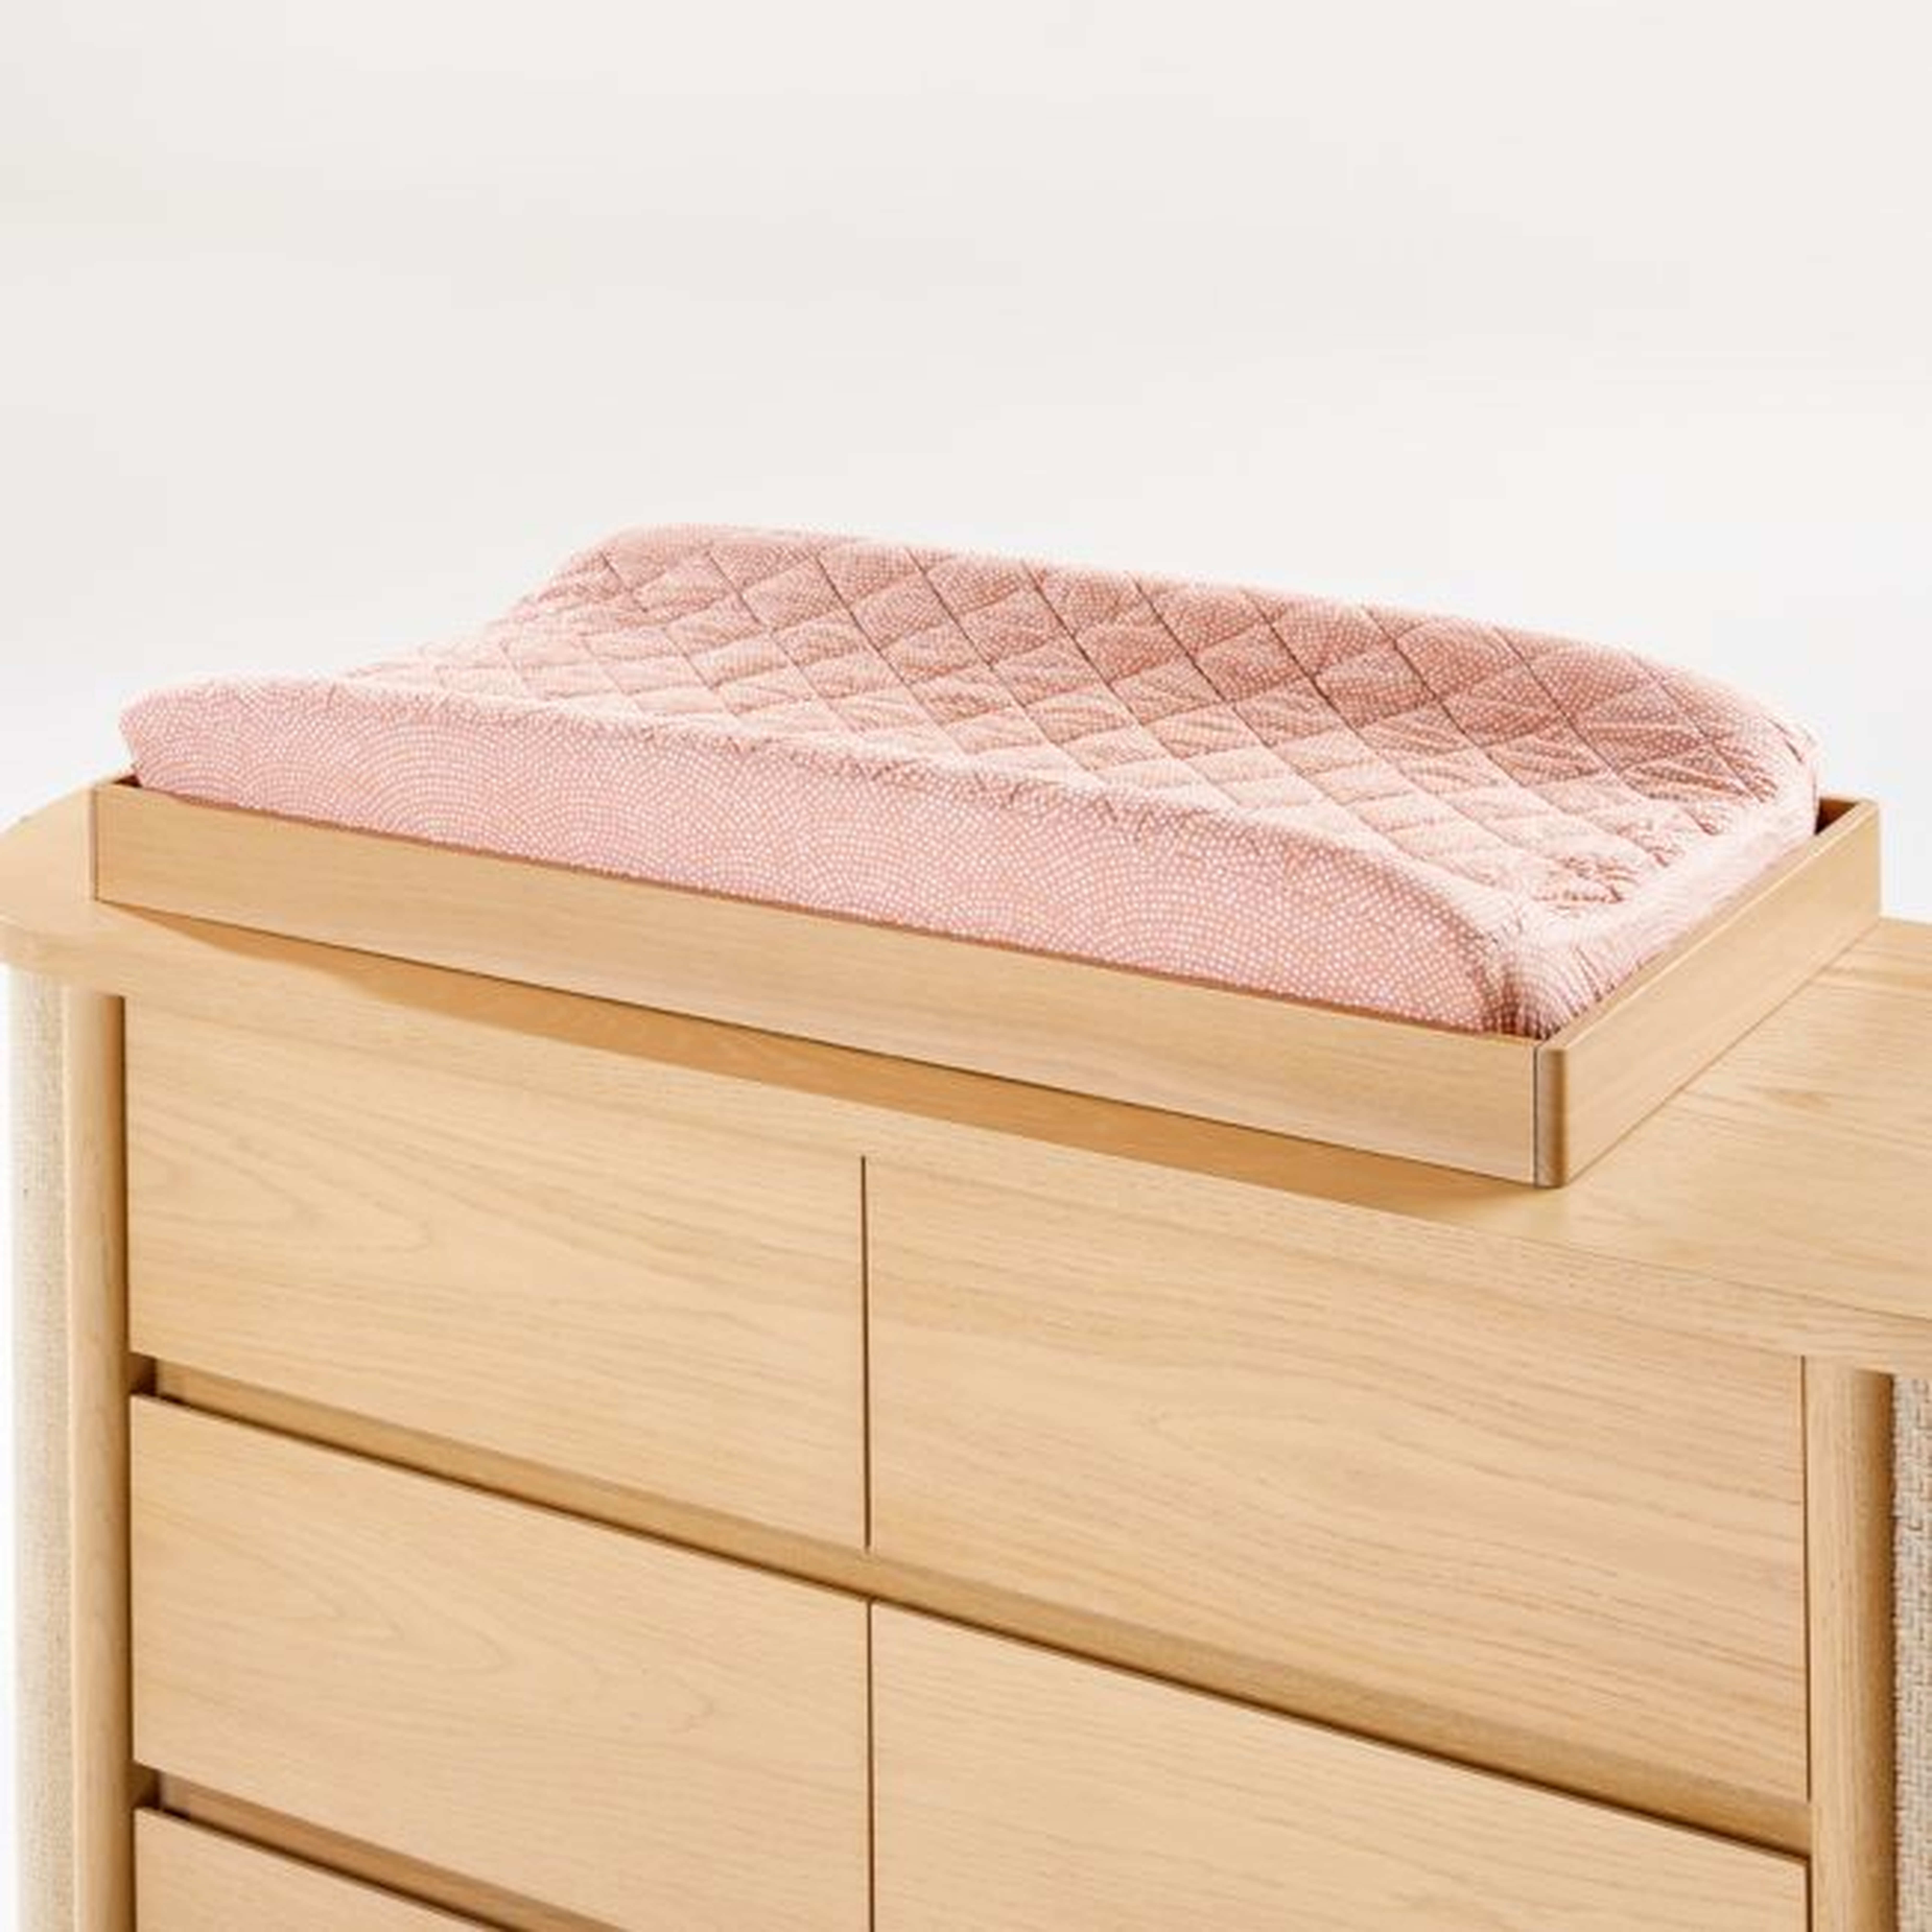 Canyon Natural Wood Baby Changing Table Topper by Leanne Ford - Crate and Barrel